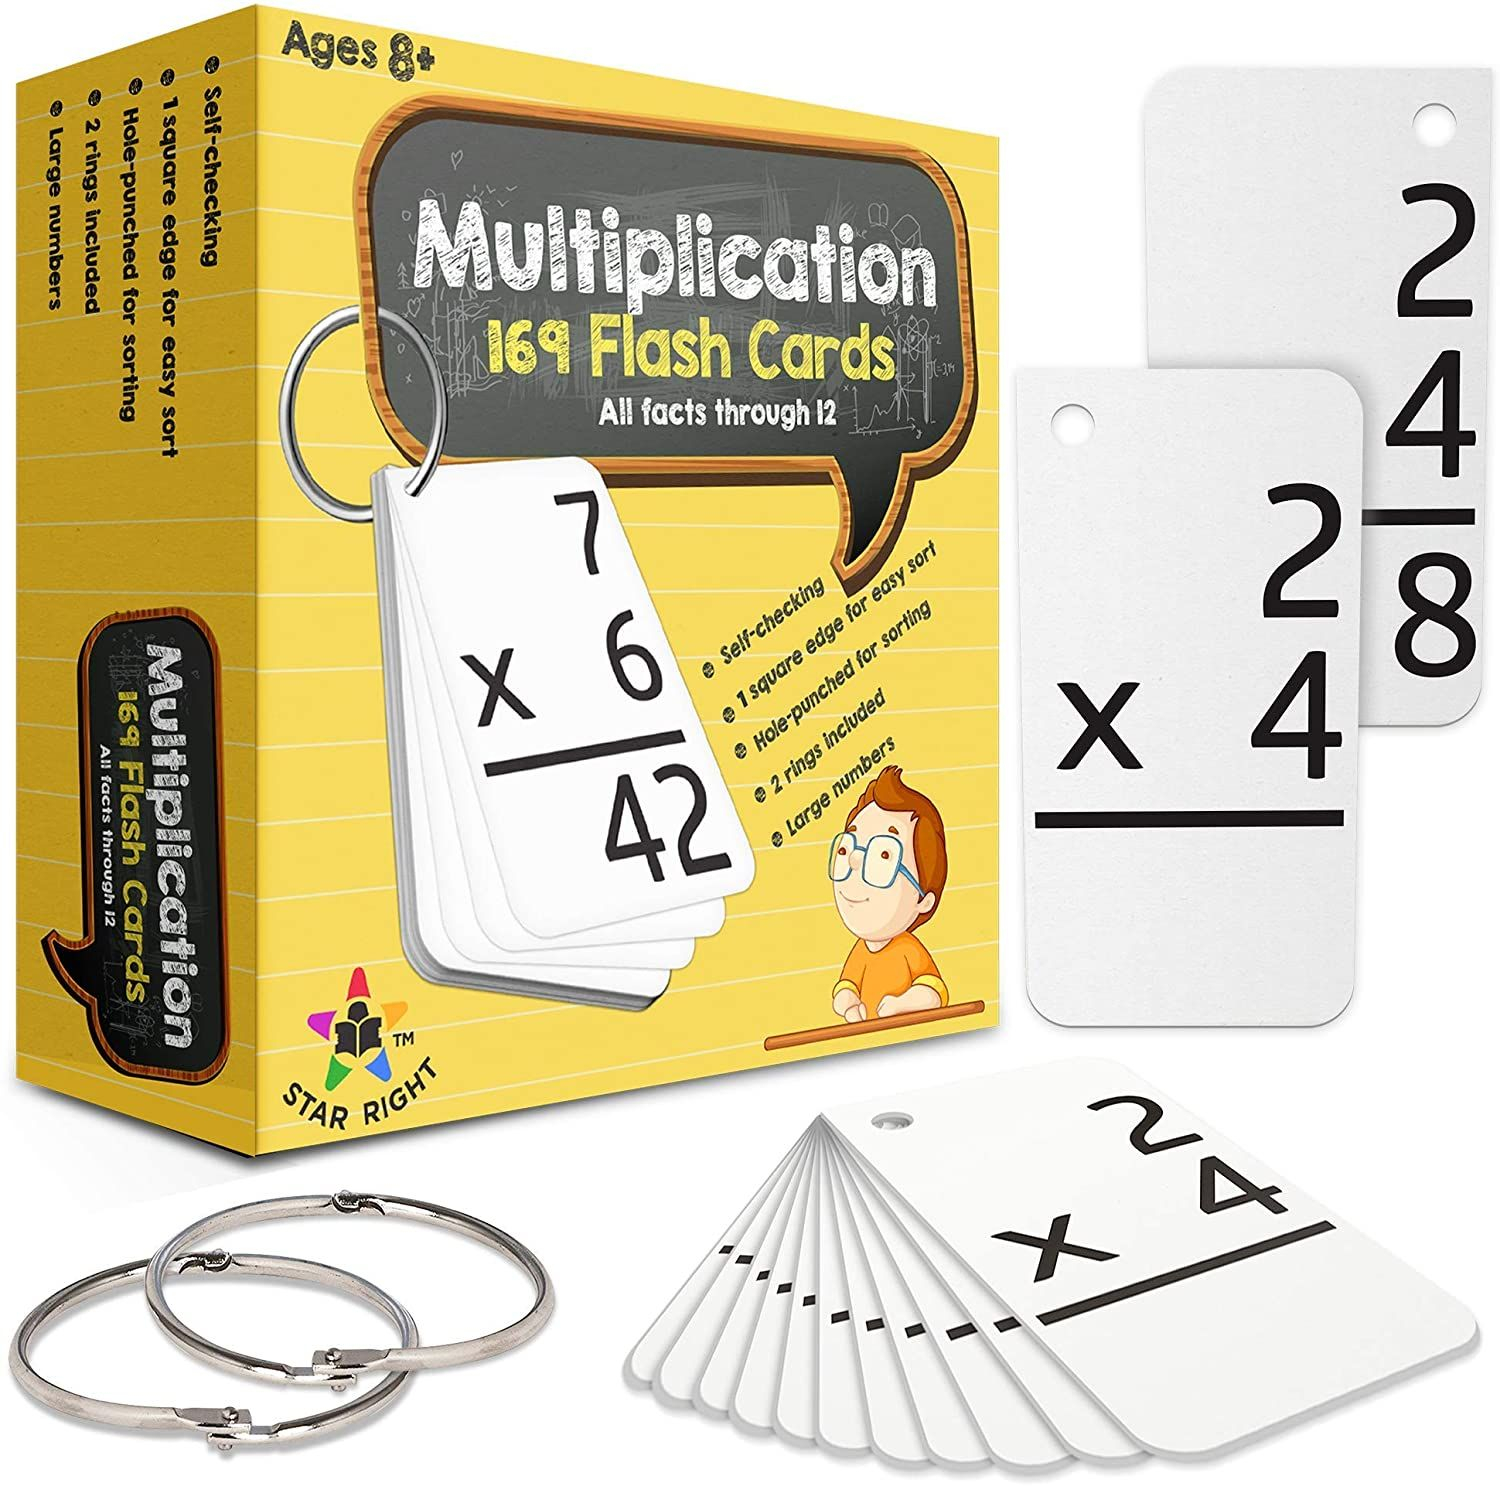 Star Right Multiplication With 2 Metal Binder Rings | 169